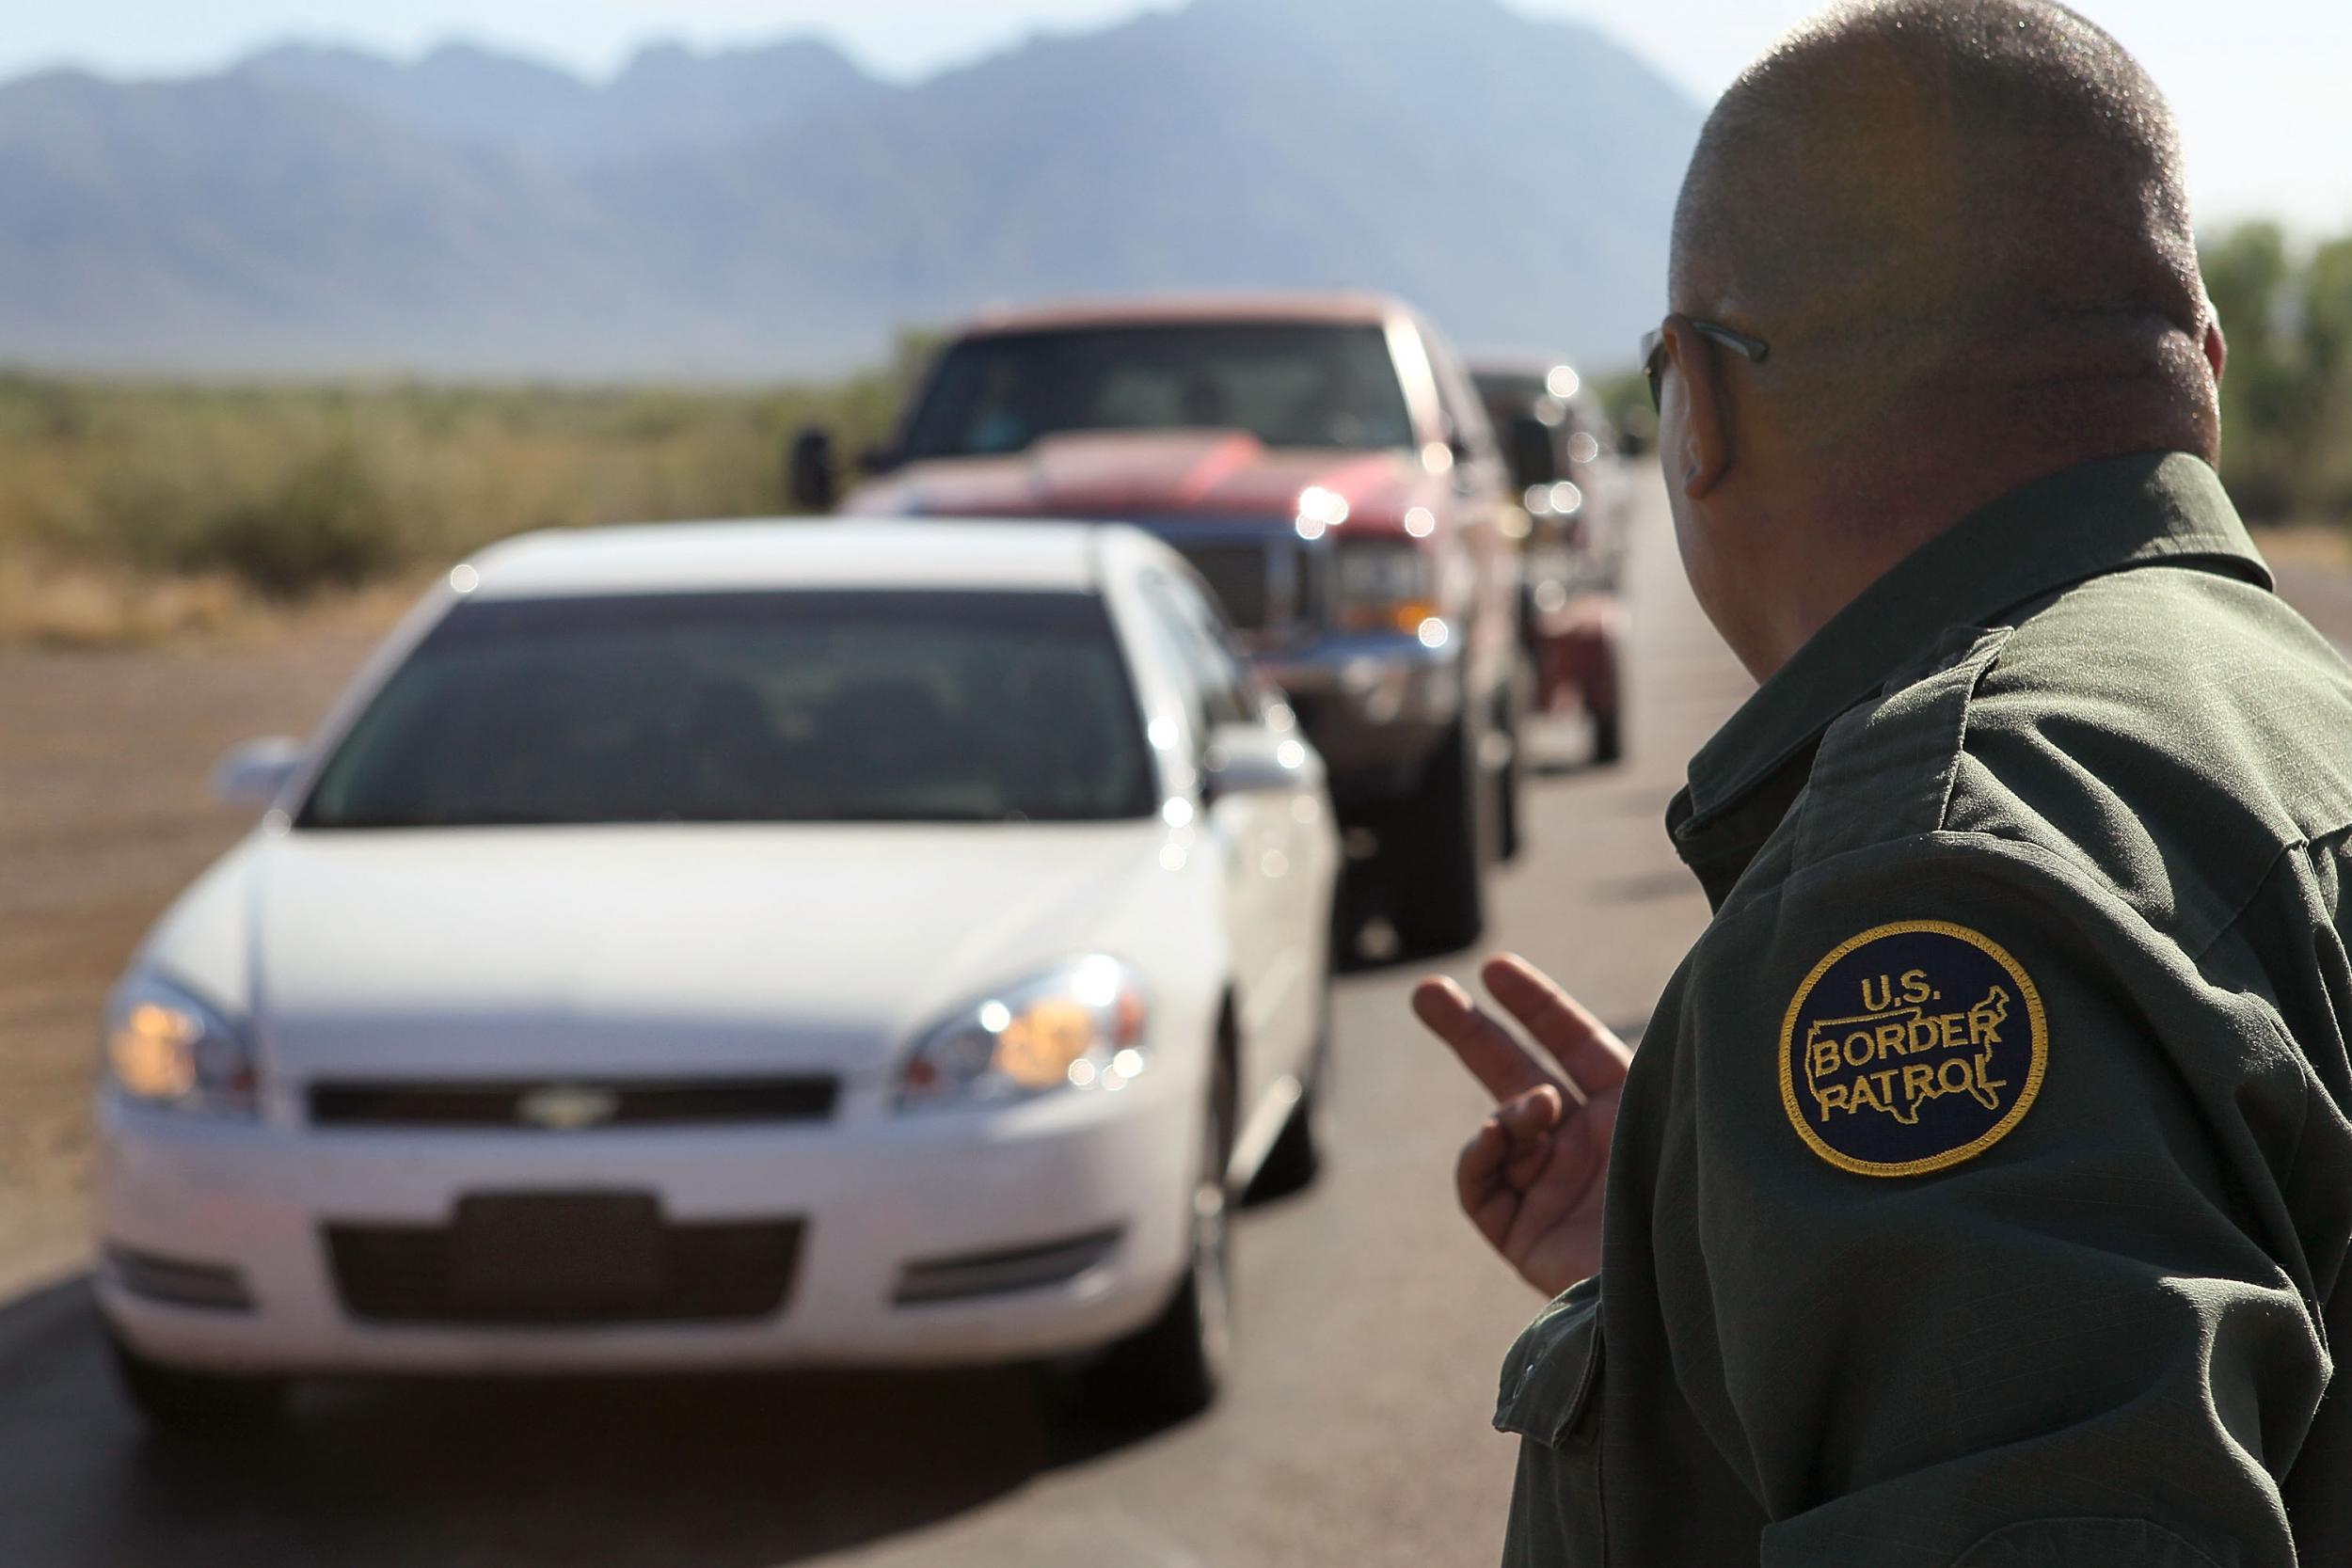 Roadside checkpoints are deterring undocumented immigrants from seeking medical care